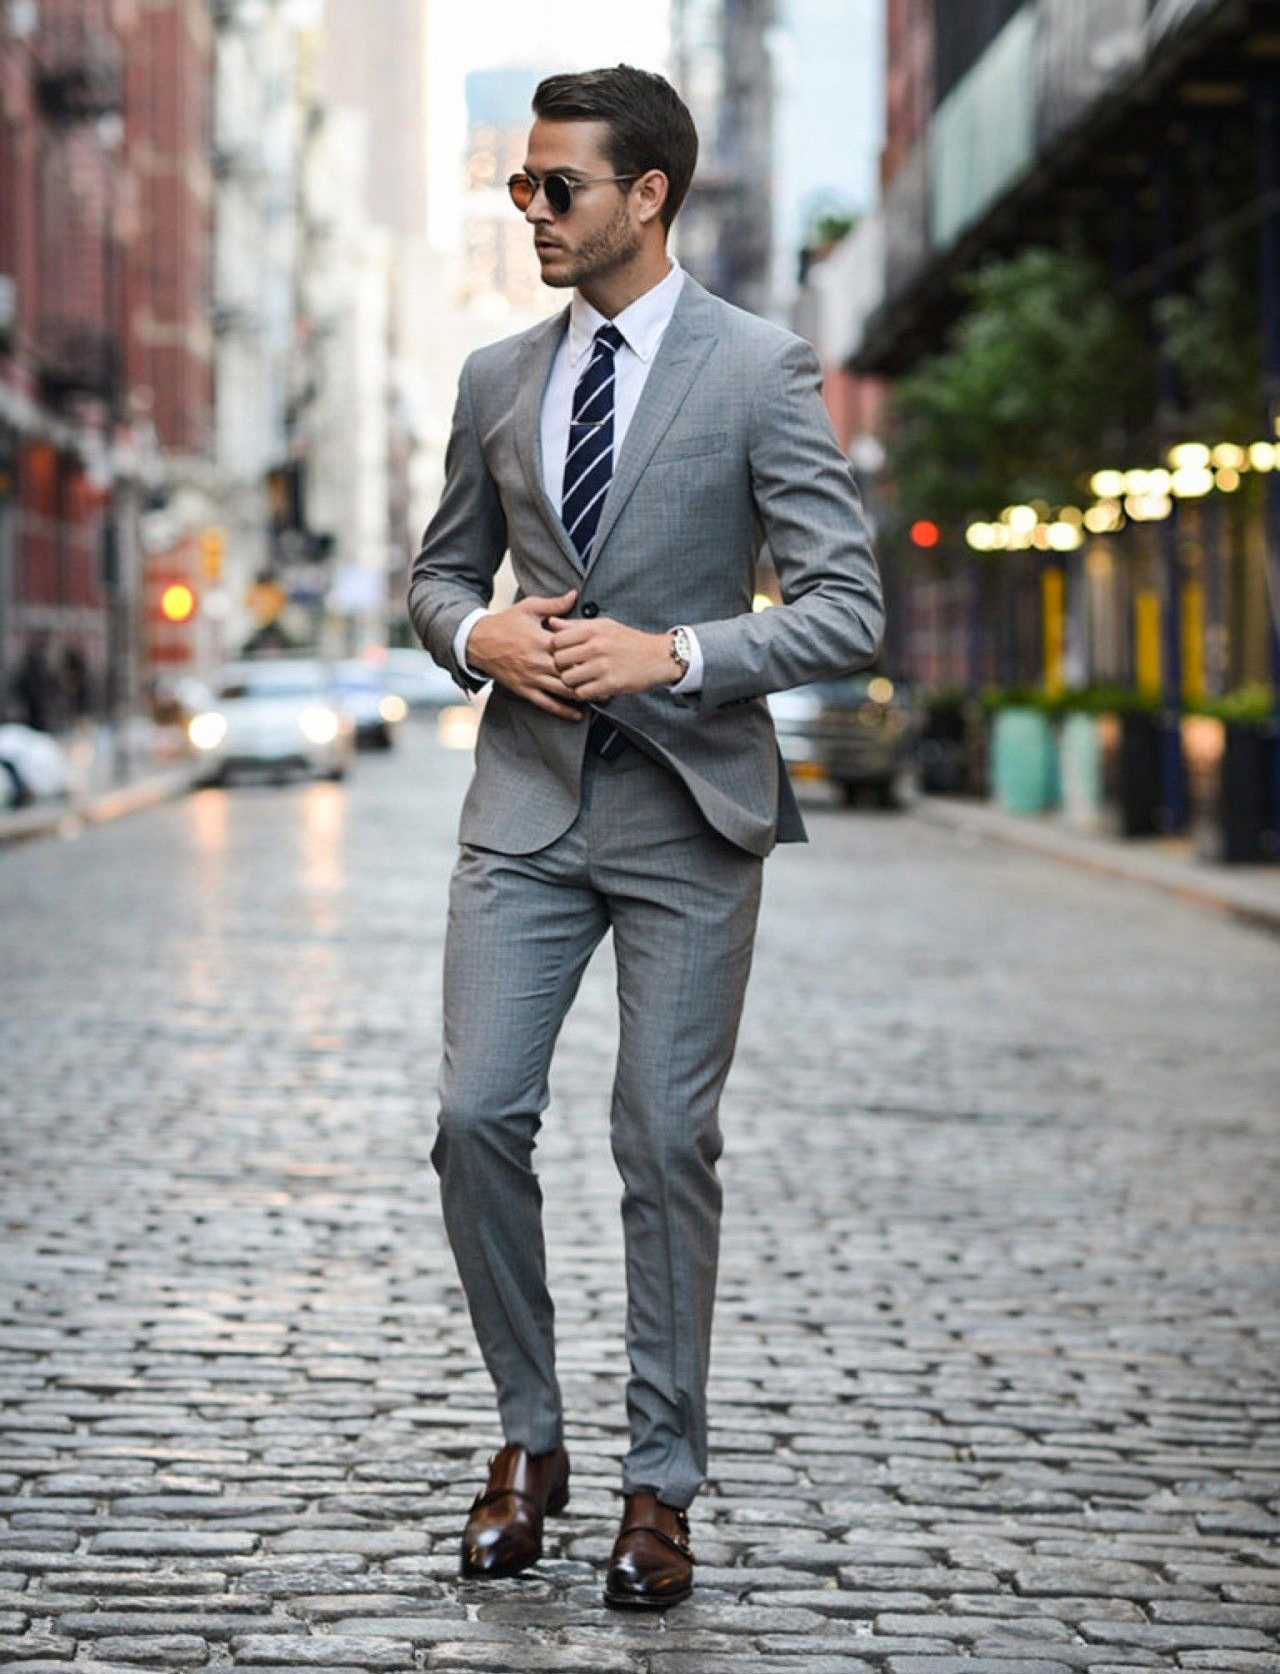 Grey suit, white shirt, navy striped tie, and brown dress shoes